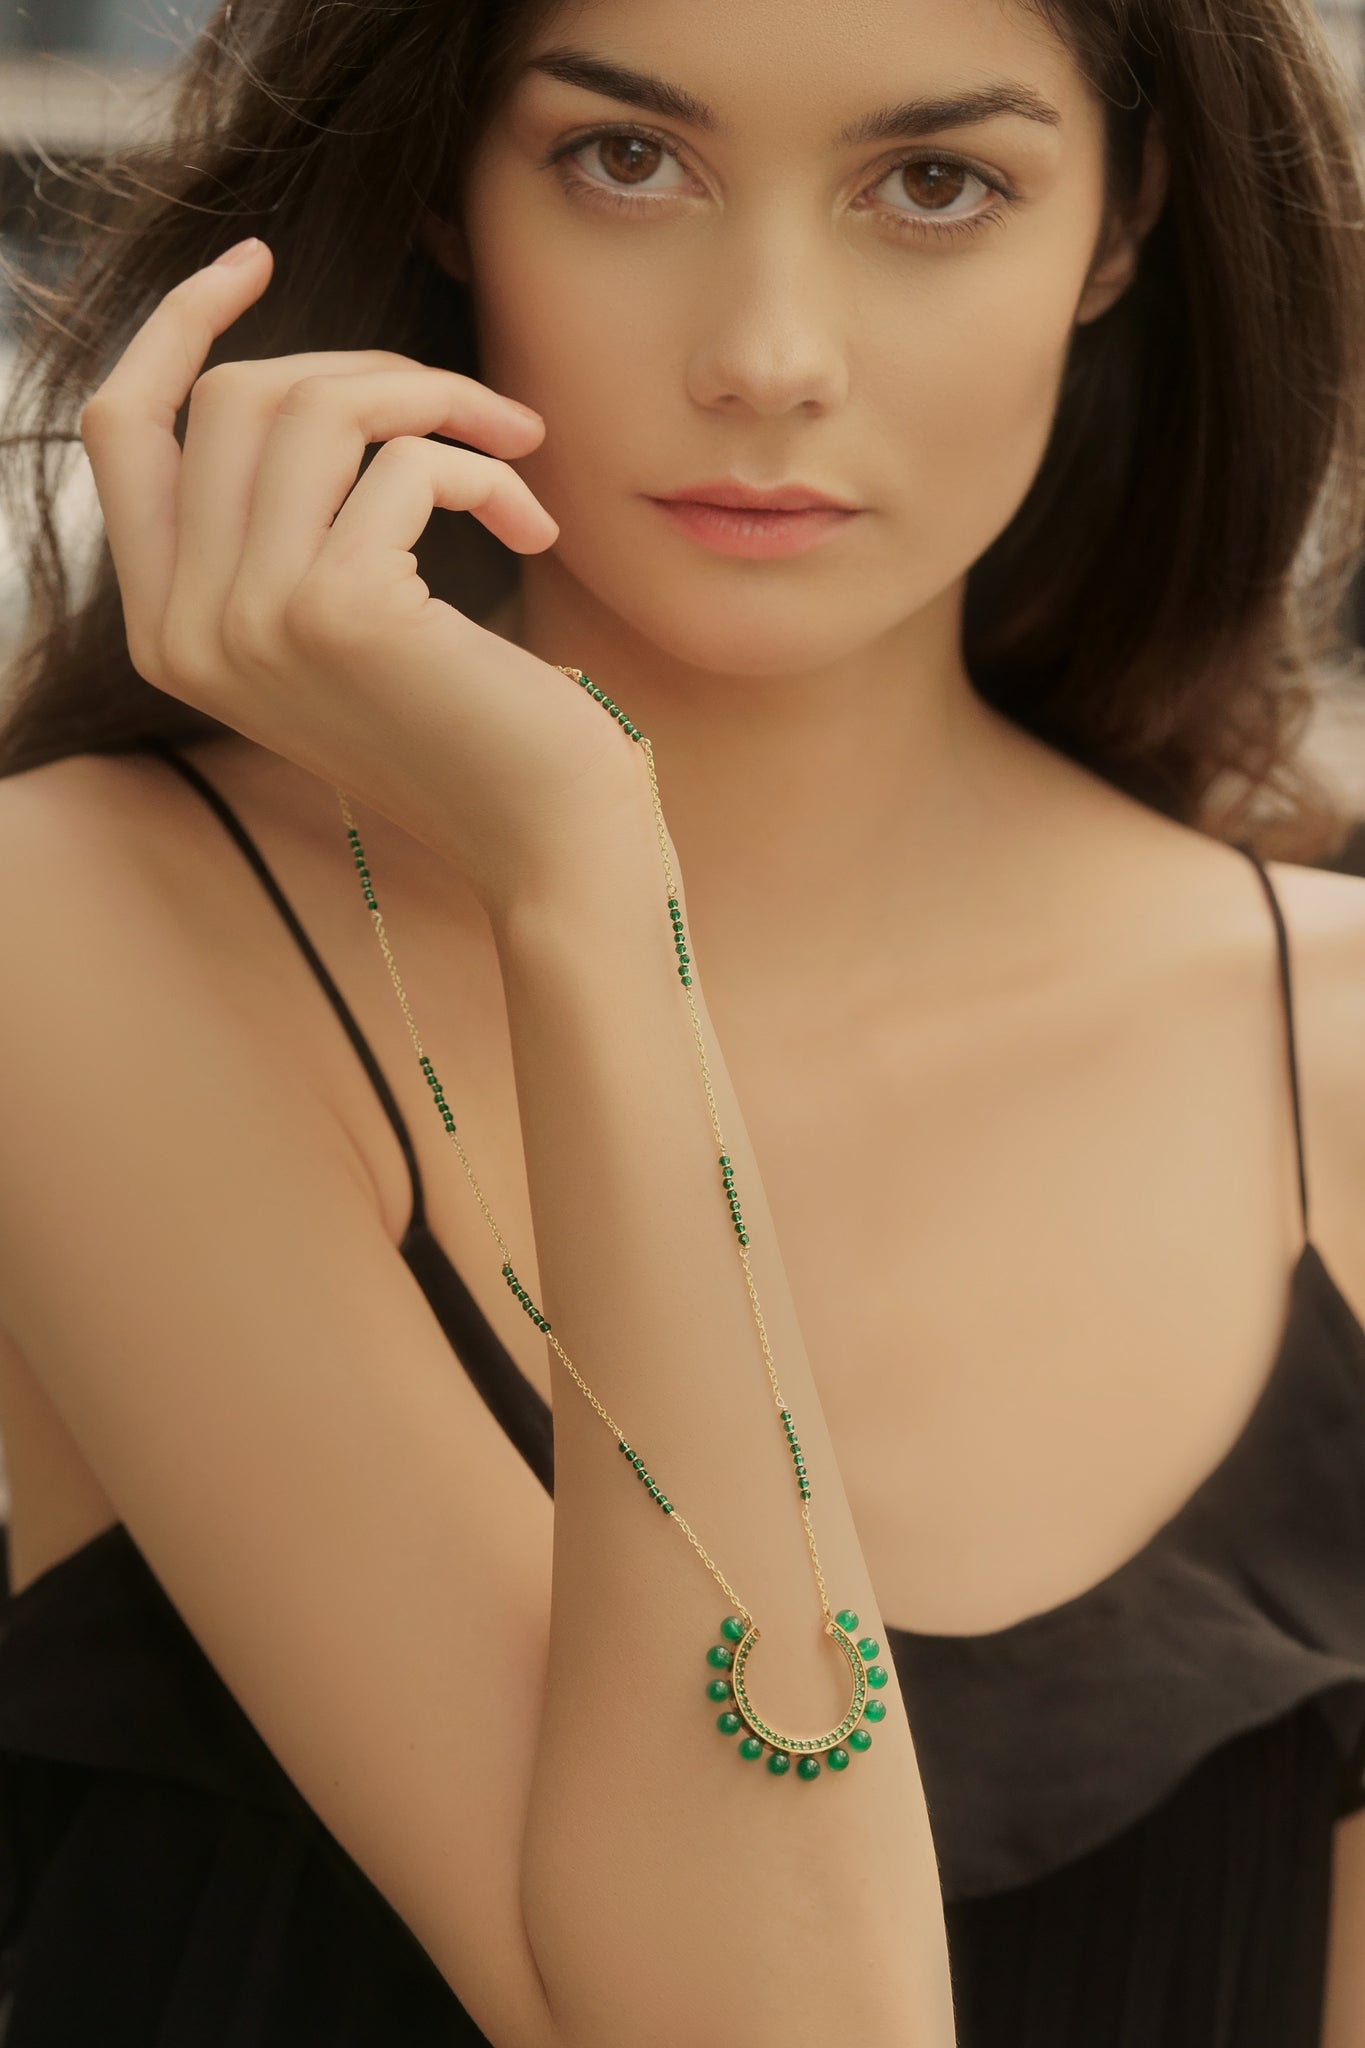 Too Ninety Degree Necklace - Emerald